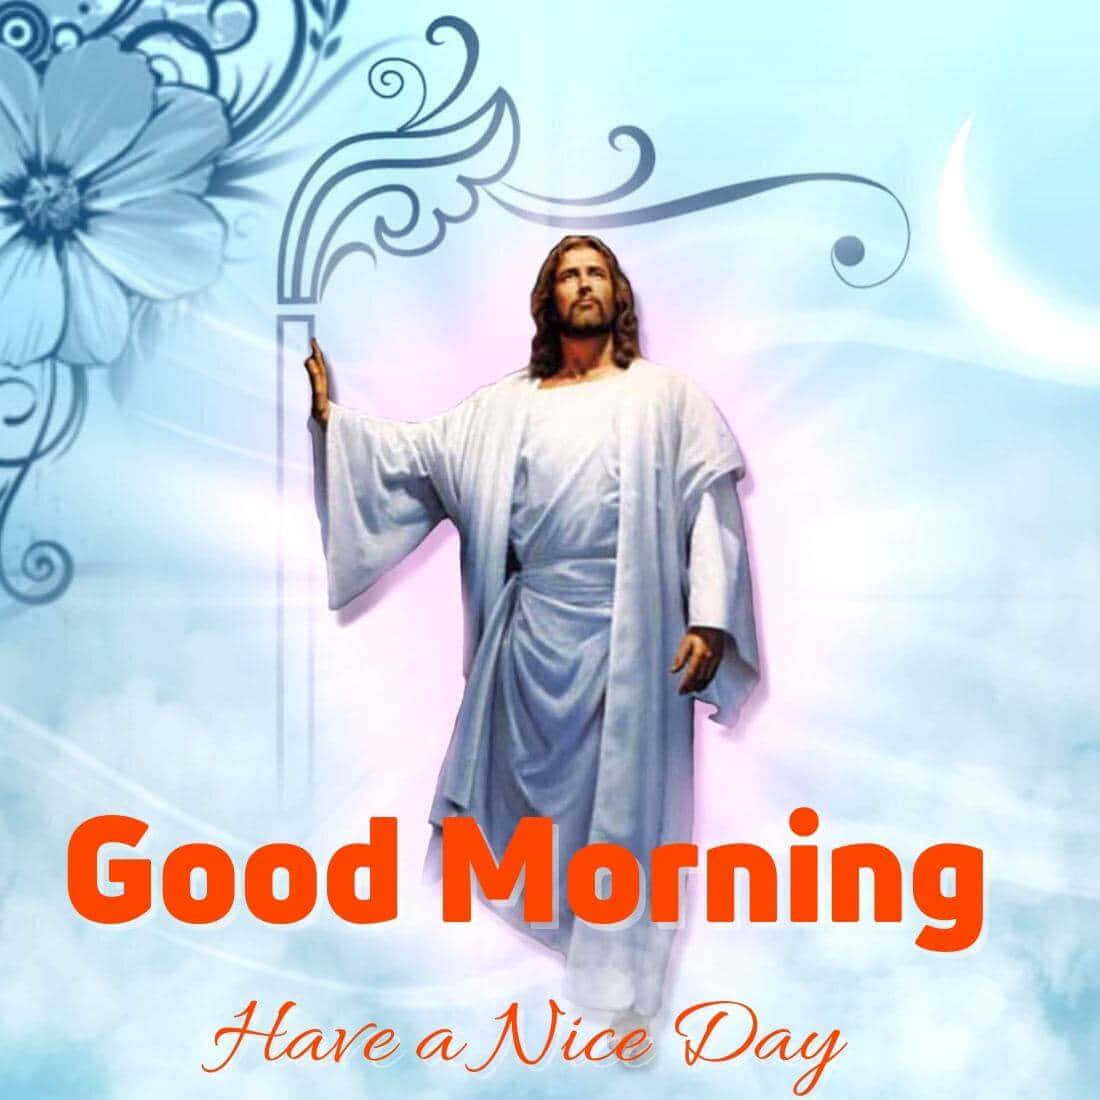 Download Good Morning Jesus Christ Picture | Wallpapers.com